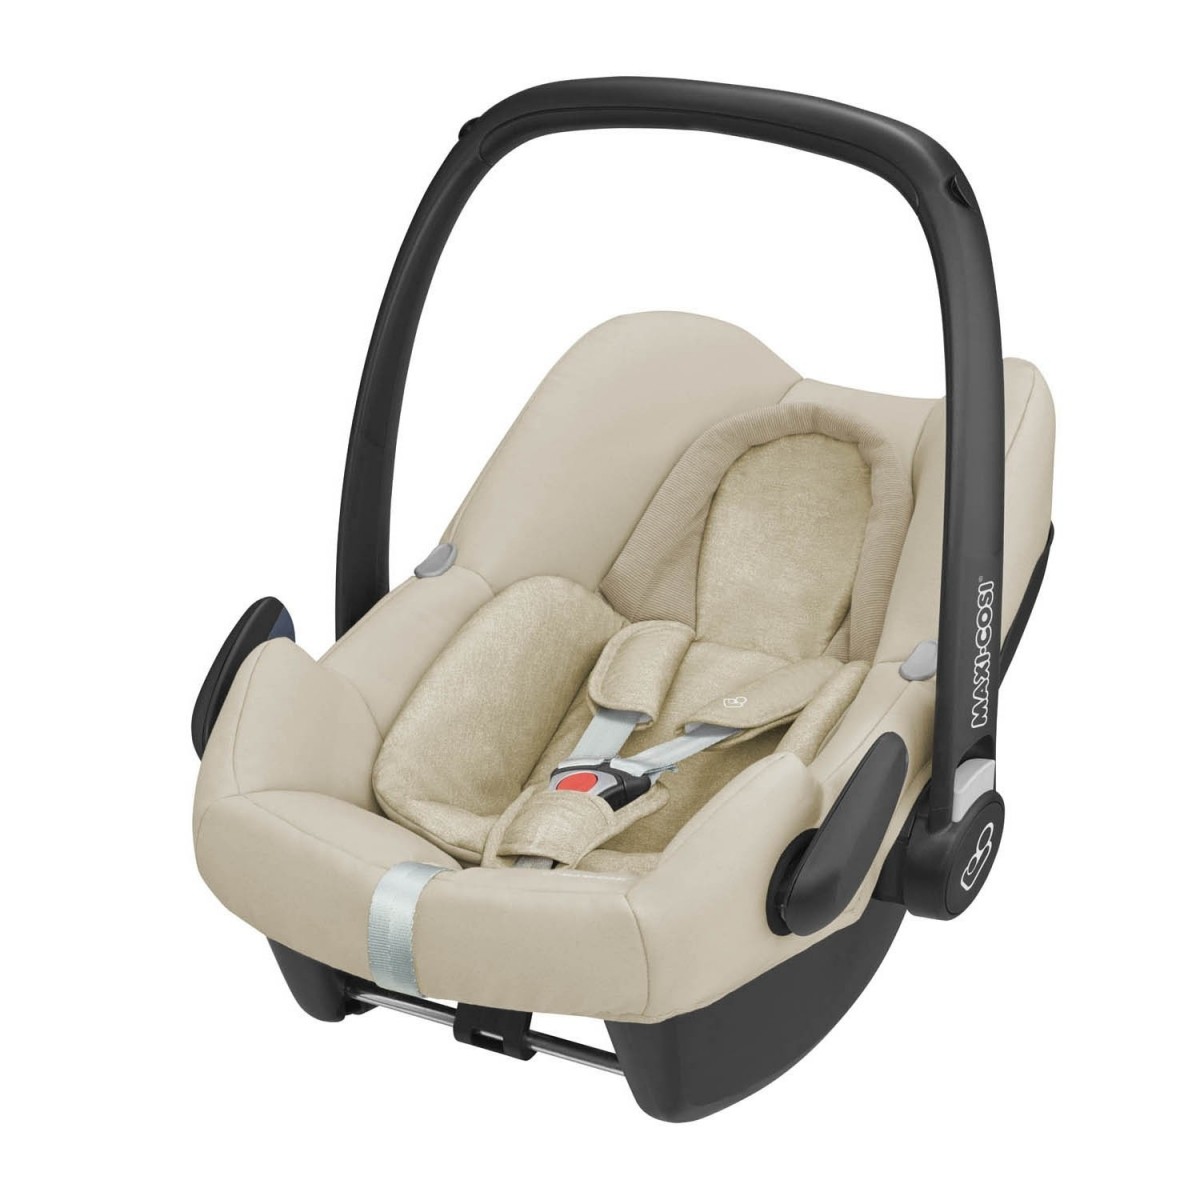 8555332110 Infant seat MAXI-COSI 8555332110 review and test